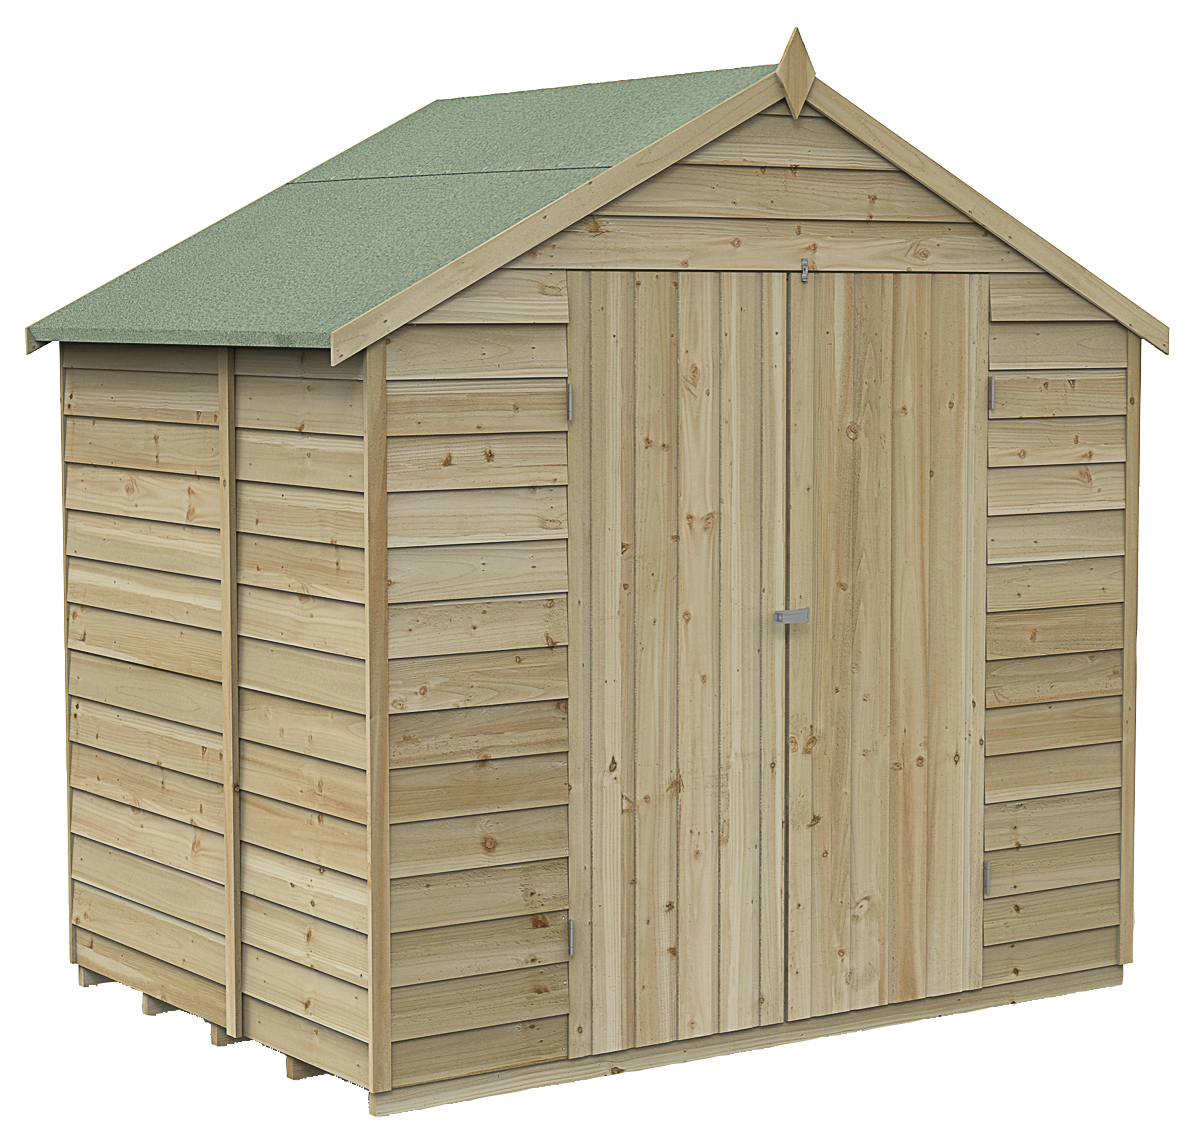 Image of Forest Garden 7 x 5ft 4Life Apex Overlap Pressure Treated Double Door Windowless Shed with Base